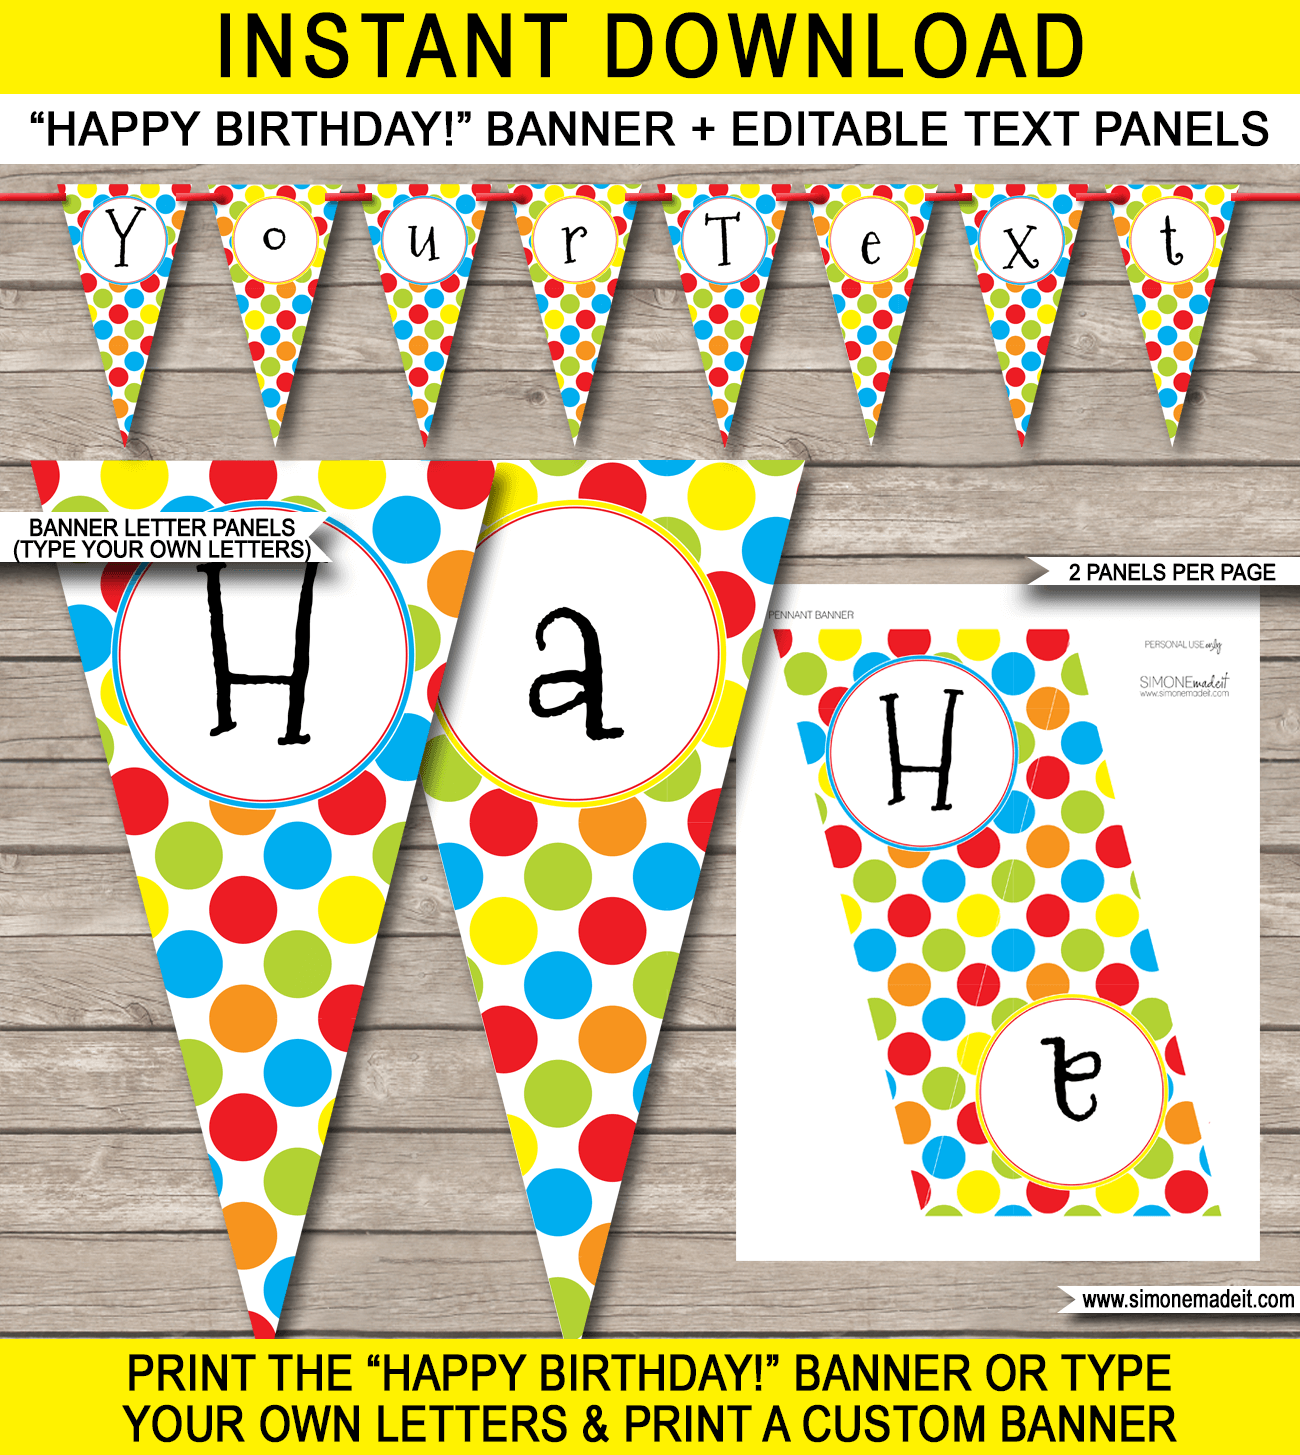 Colorful Polkadot Birthday Party Banner Template - Happy Birthday Bunting Pennants - Editable and Printable DIY Template - INSTANT DOWNLOAD $4.50 via simonemadeit.com